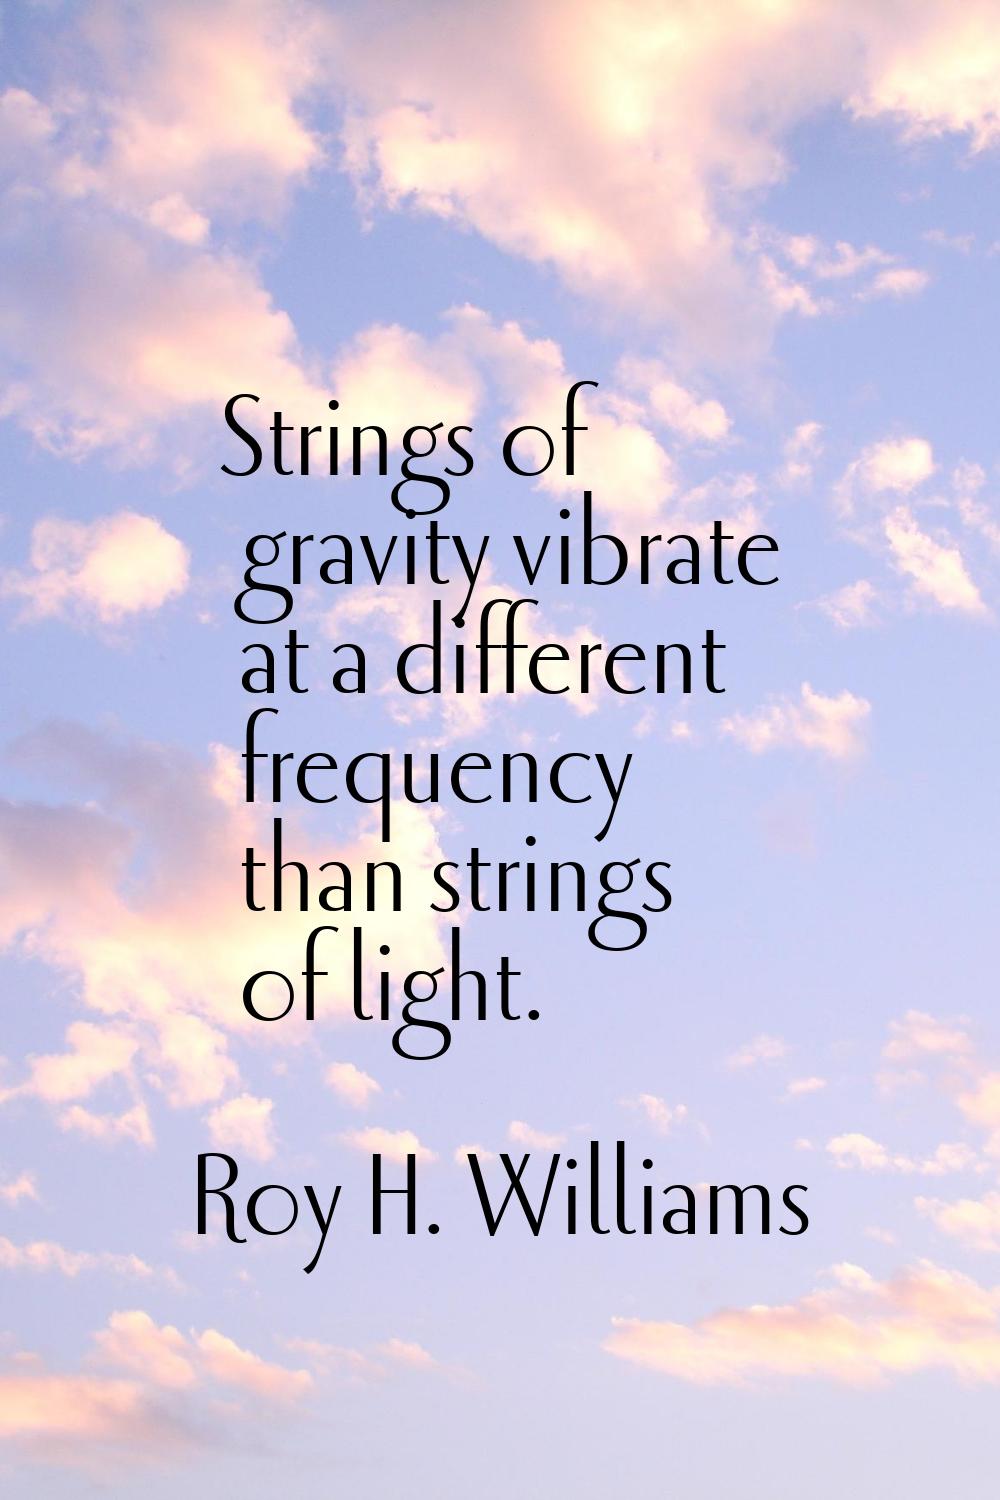 Strings of gravity vibrate at a different frequency than strings of light.